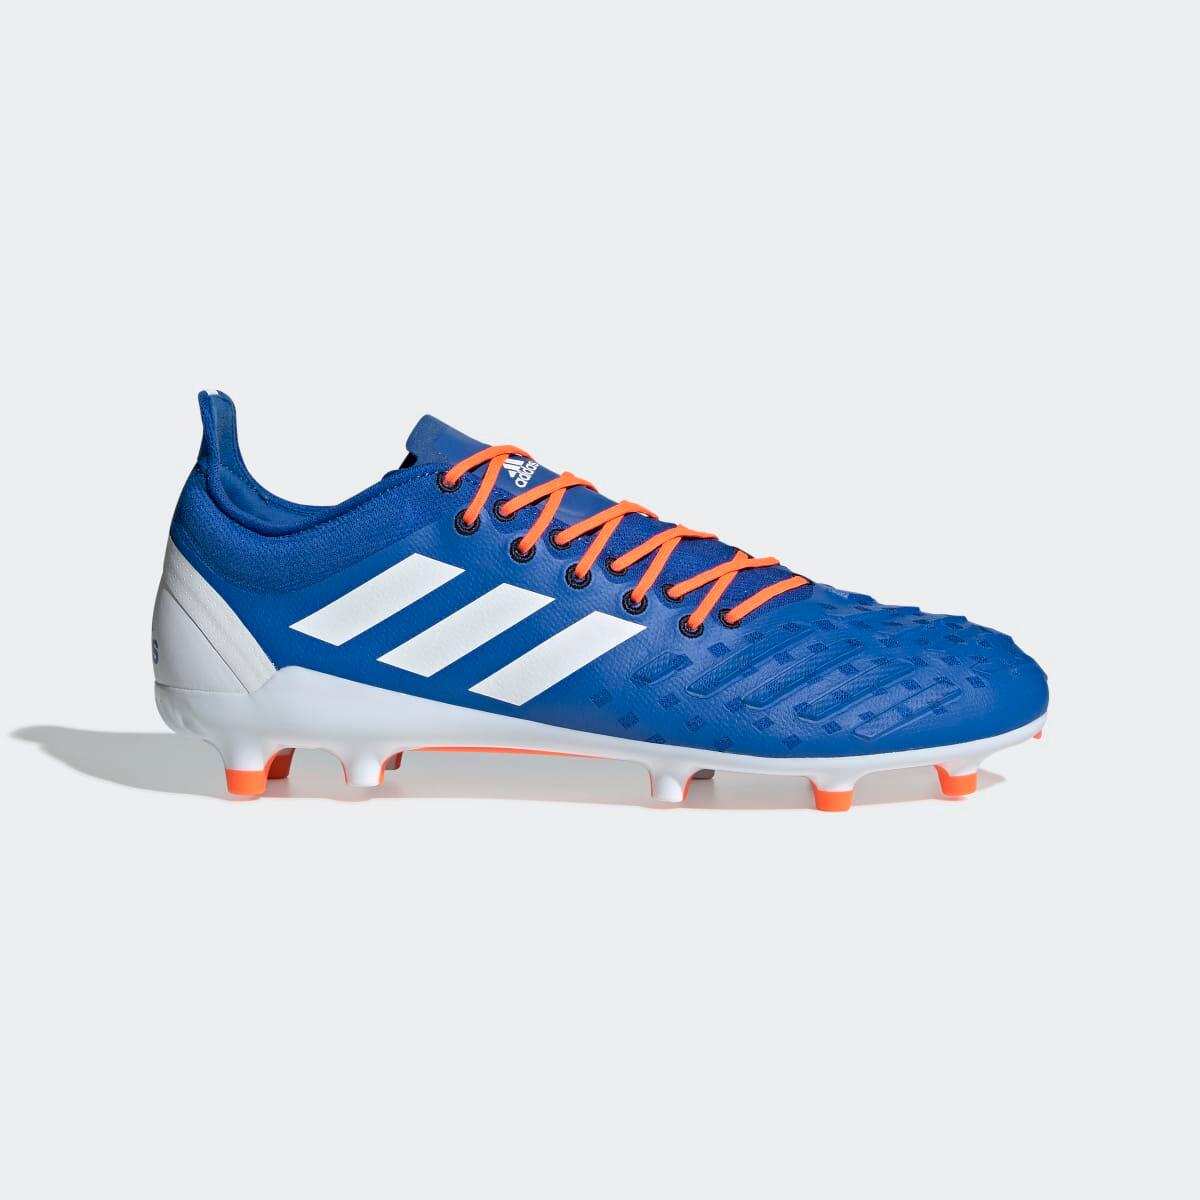 Adidas Predator XP Firm Ground Rugby Boots 1/7